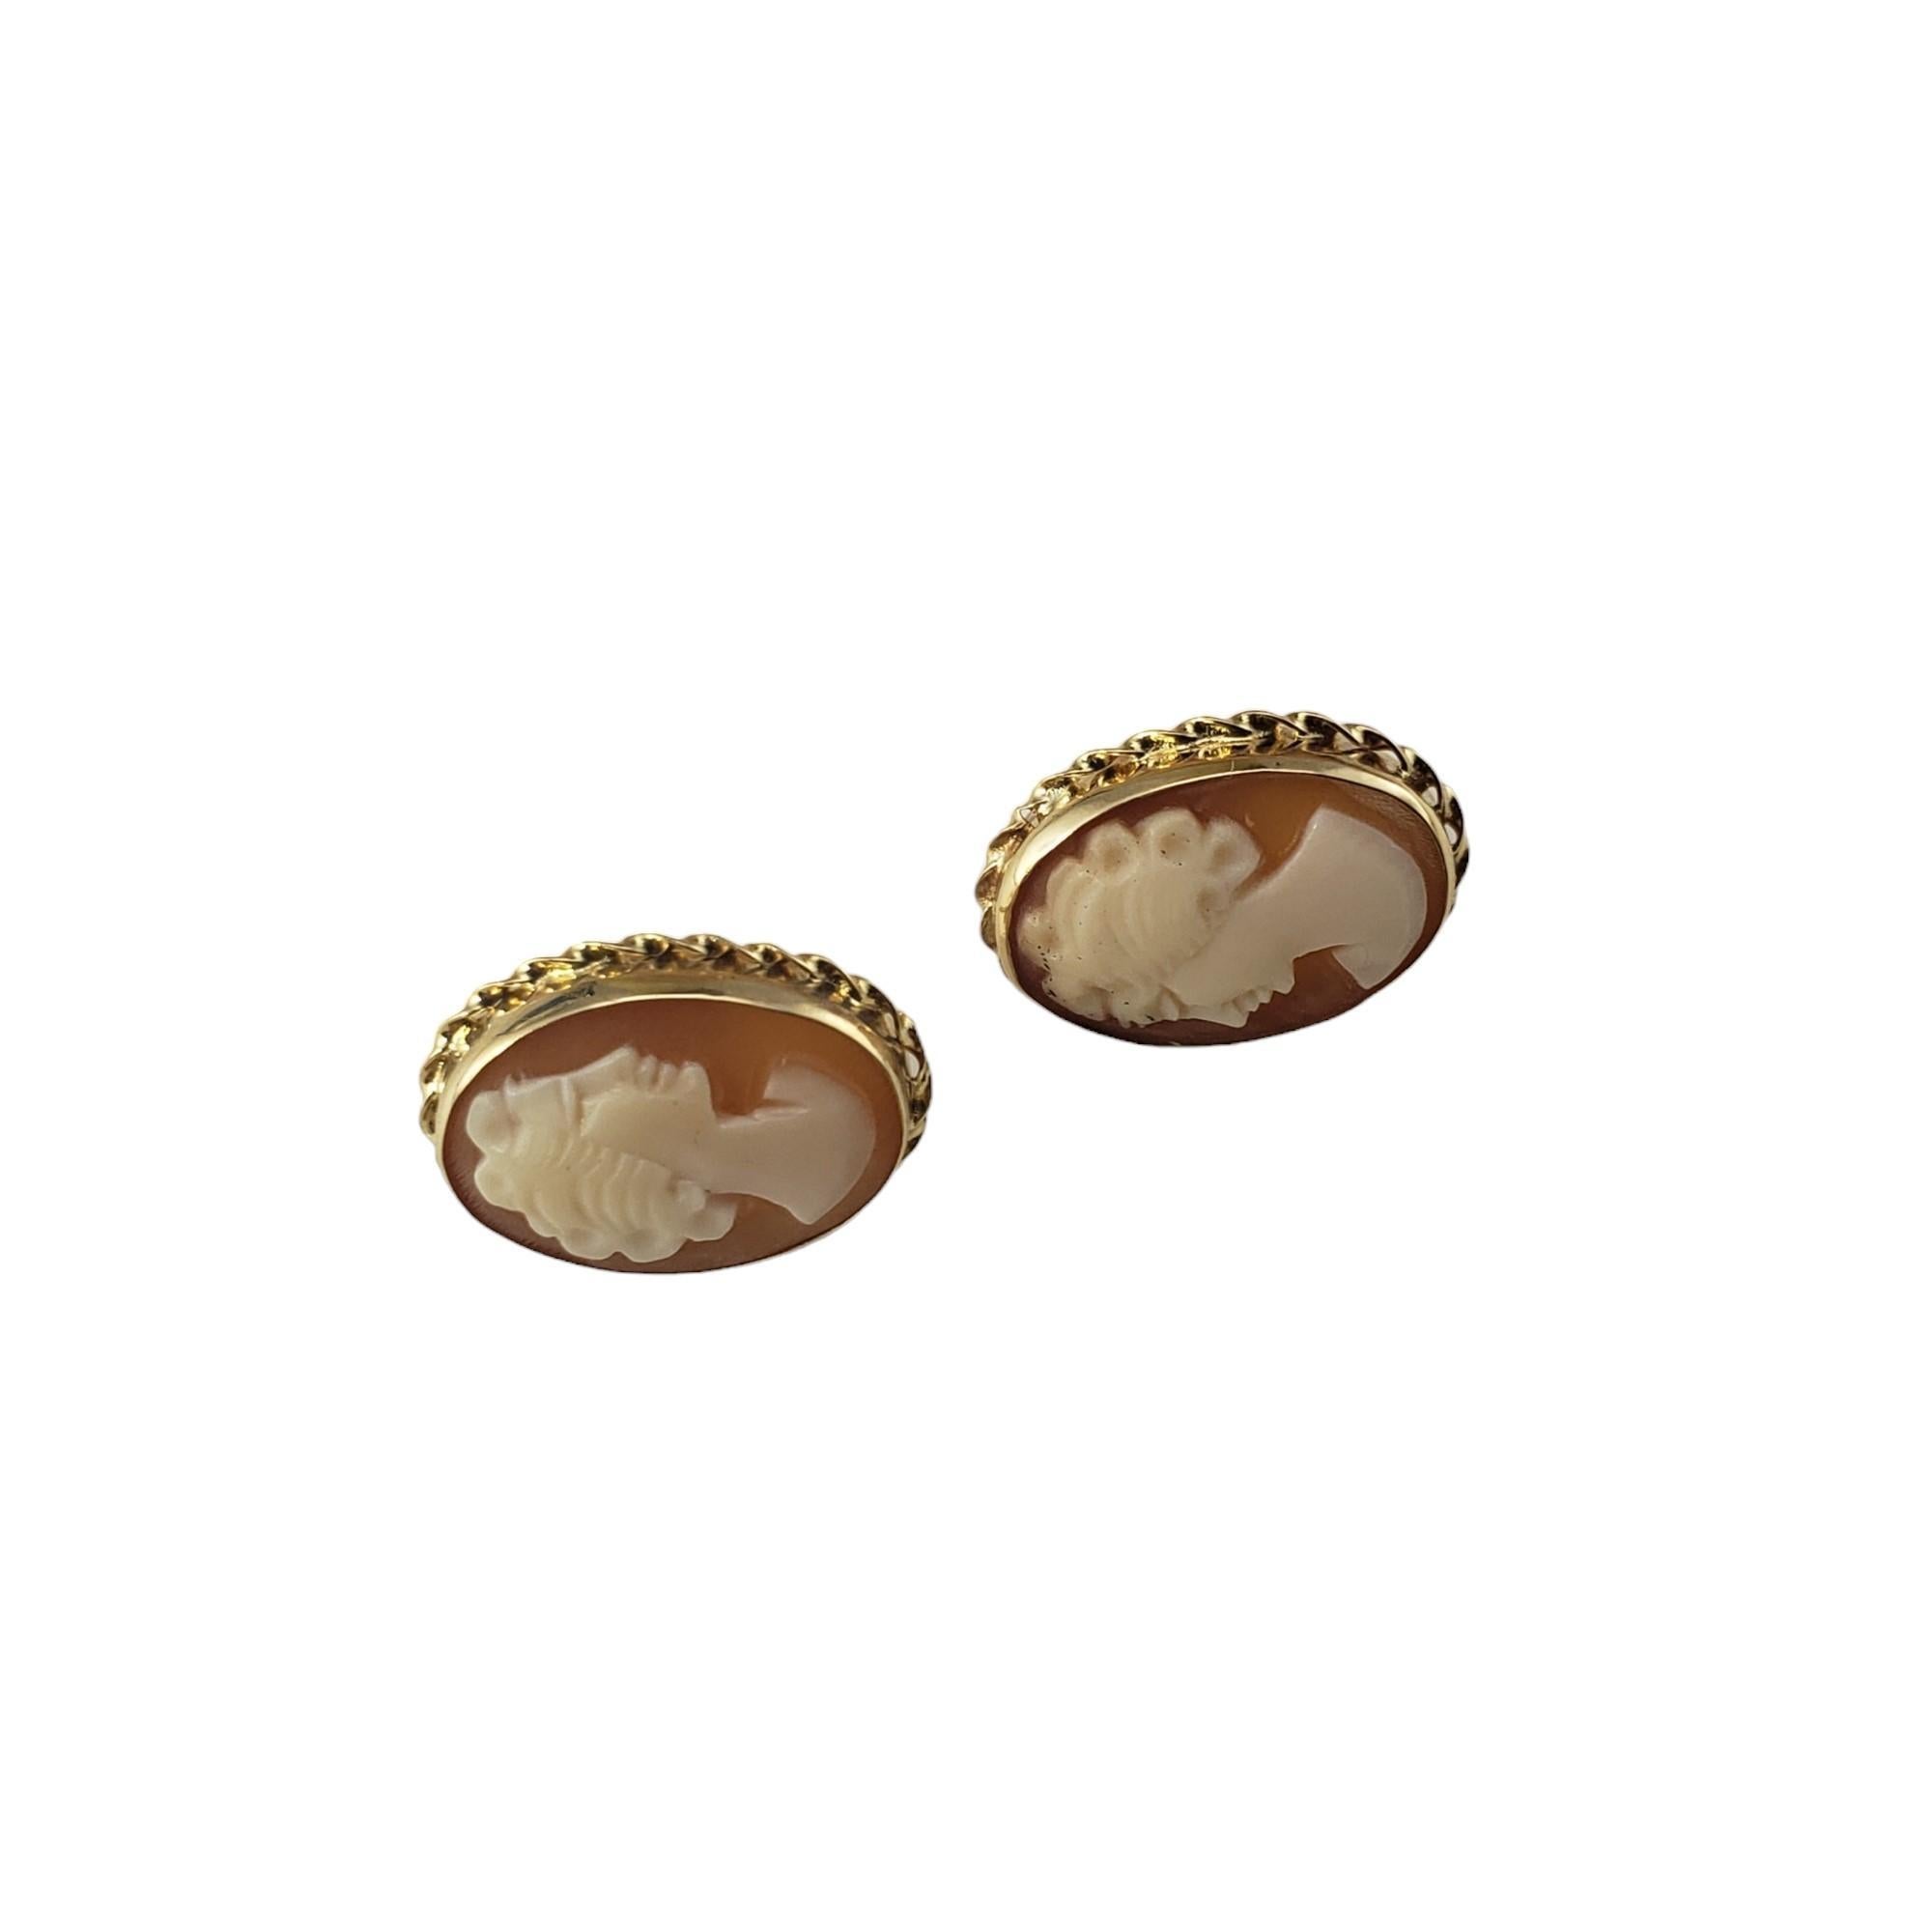  14 Karat Yellow Gold Cameo Earrings #15520 In Good Condition For Sale In Washington Depot, CT